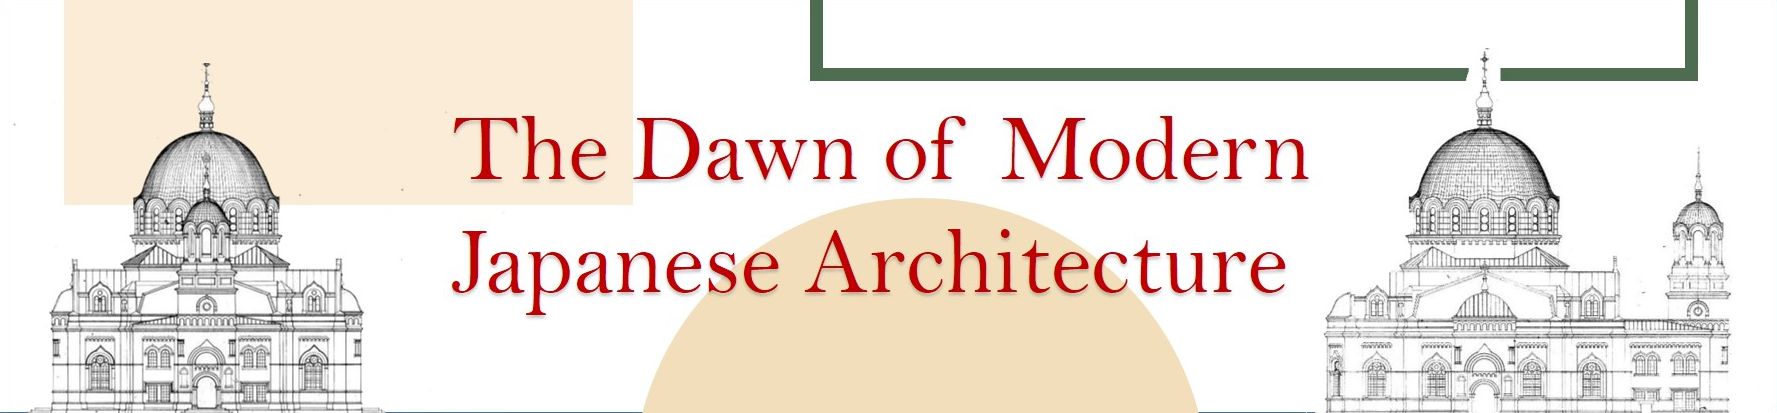 The Dawn of Modern Japanese Architecture